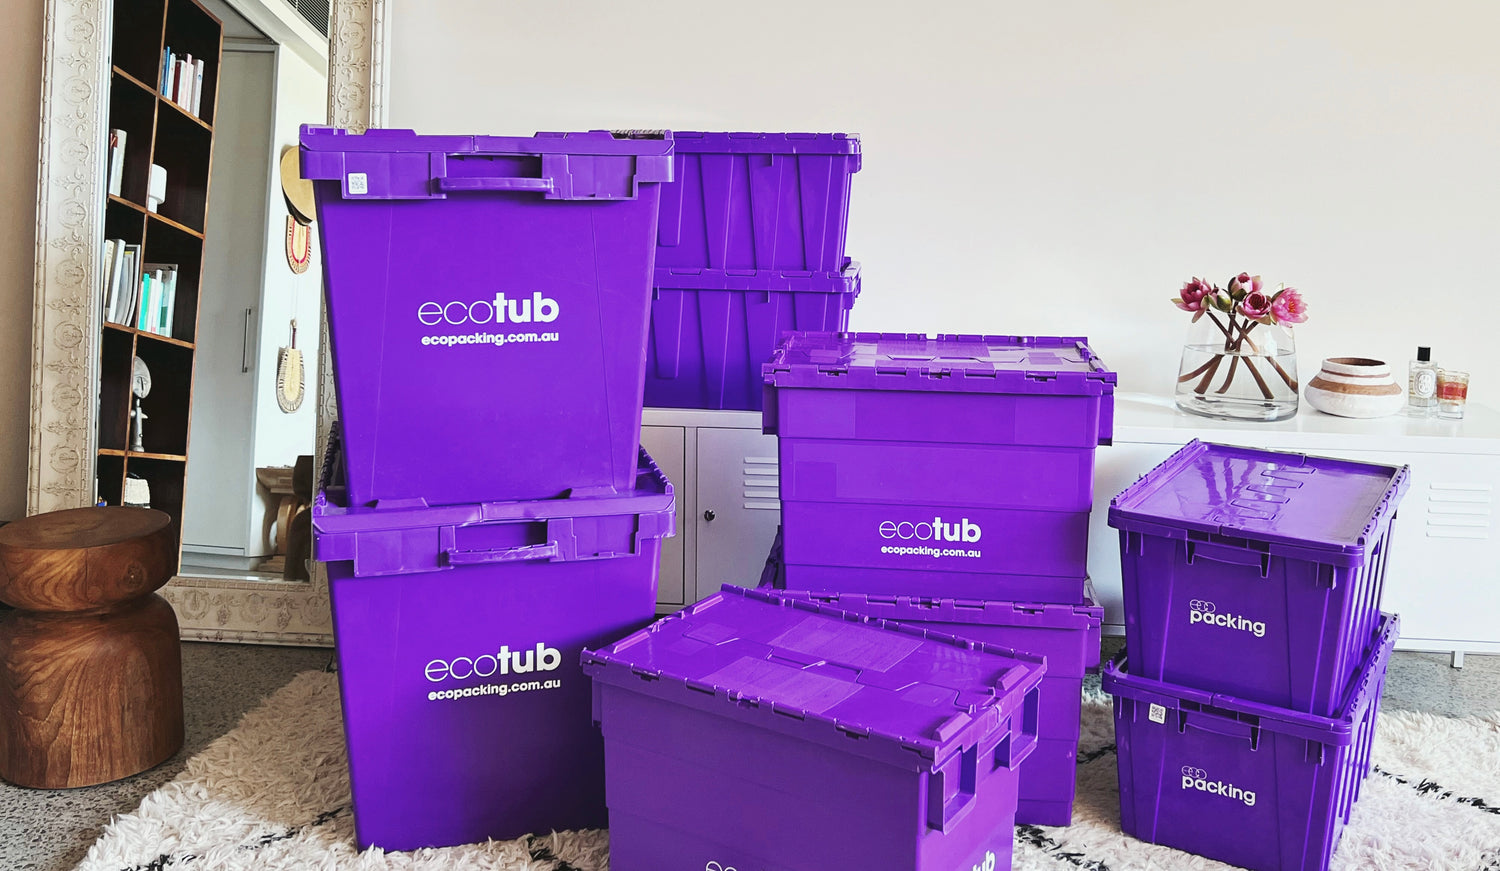 Three sizes of eco packing tubs are available for hire in the Melbourne area.